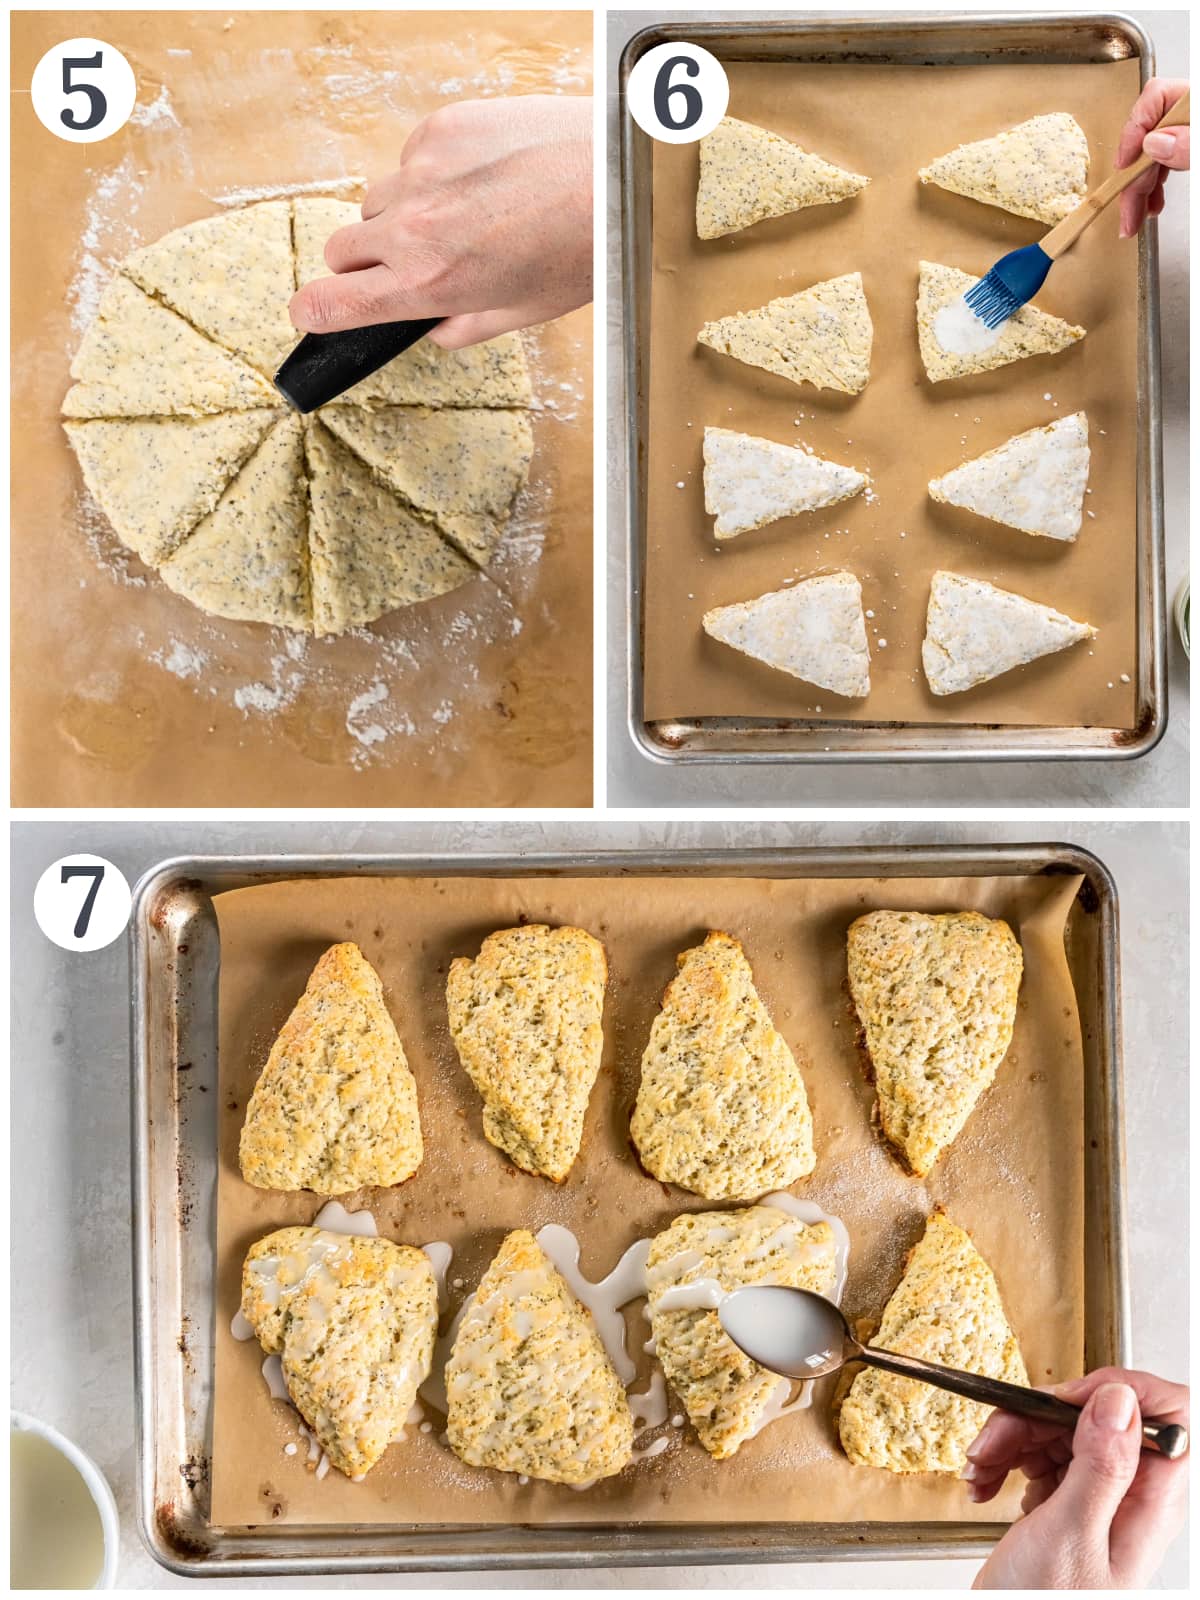 photo collage demonstrating how to shape and bake lemon poppy seed scones and add a glaze.